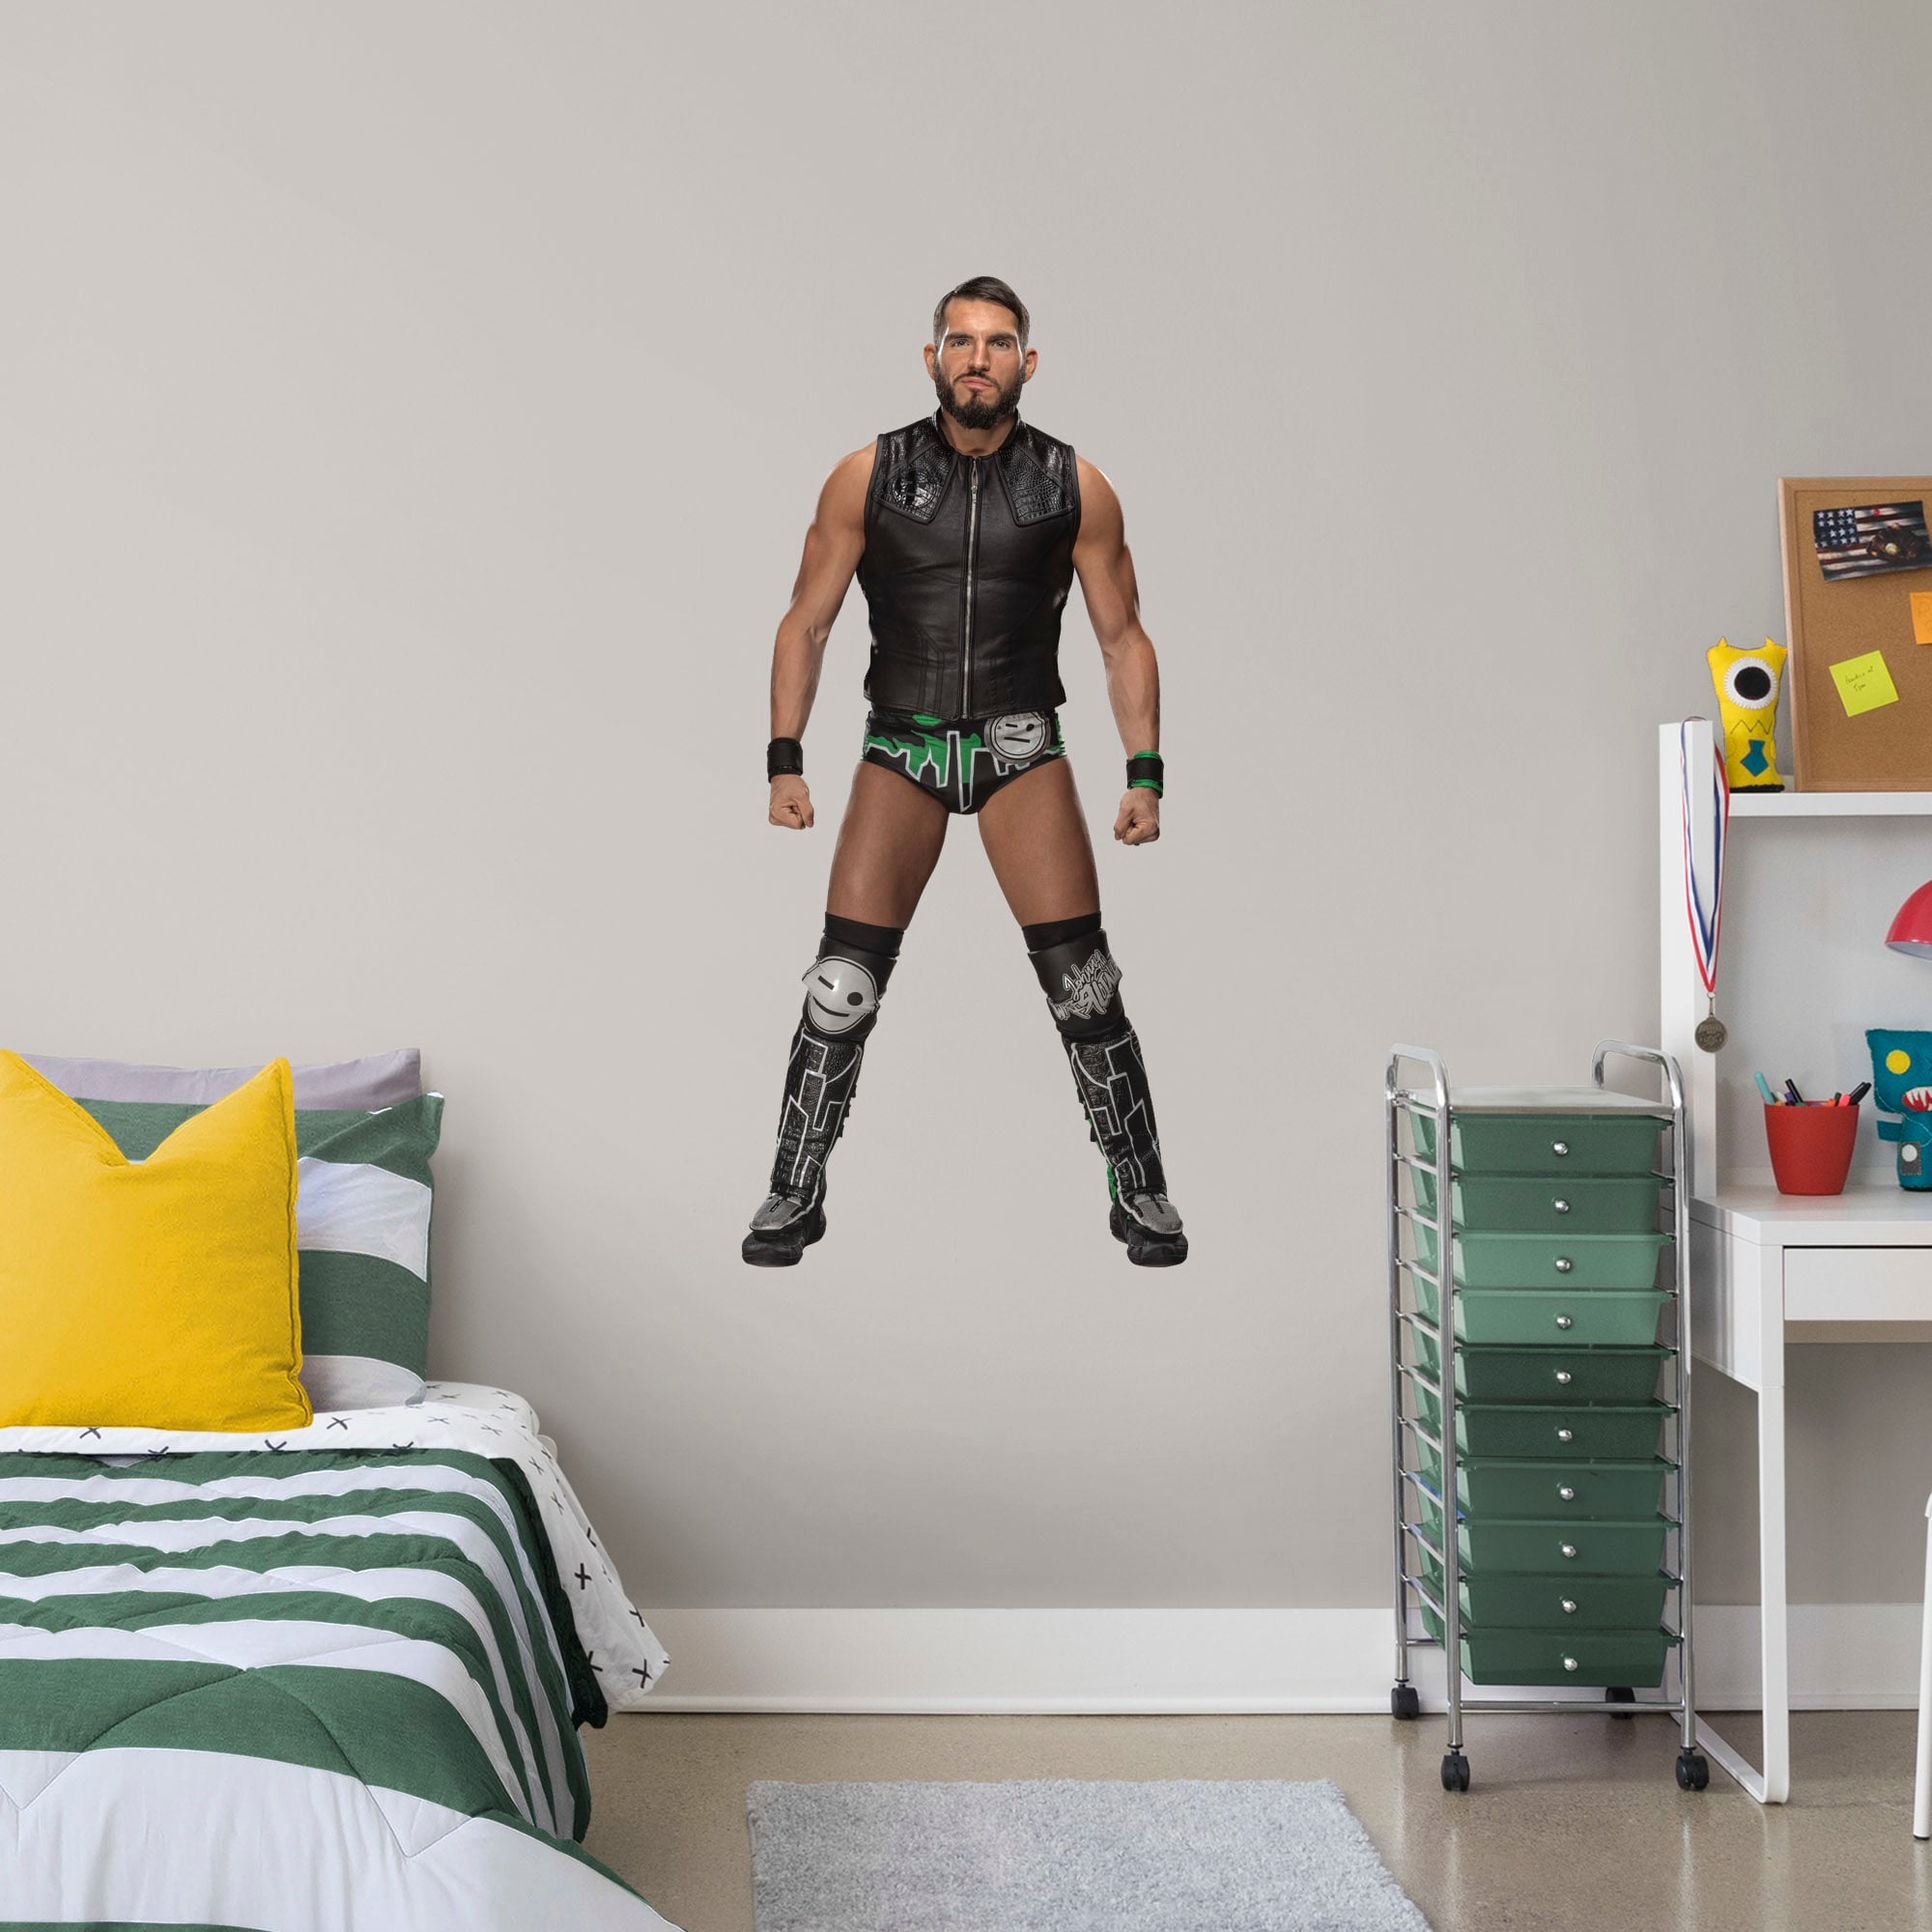 Johnny Gargano for WWE - Officially Licensed Removable Wall Decal Giant Superstar + 2 Decals (23"W x 51"H) by Fathead | Vinyl